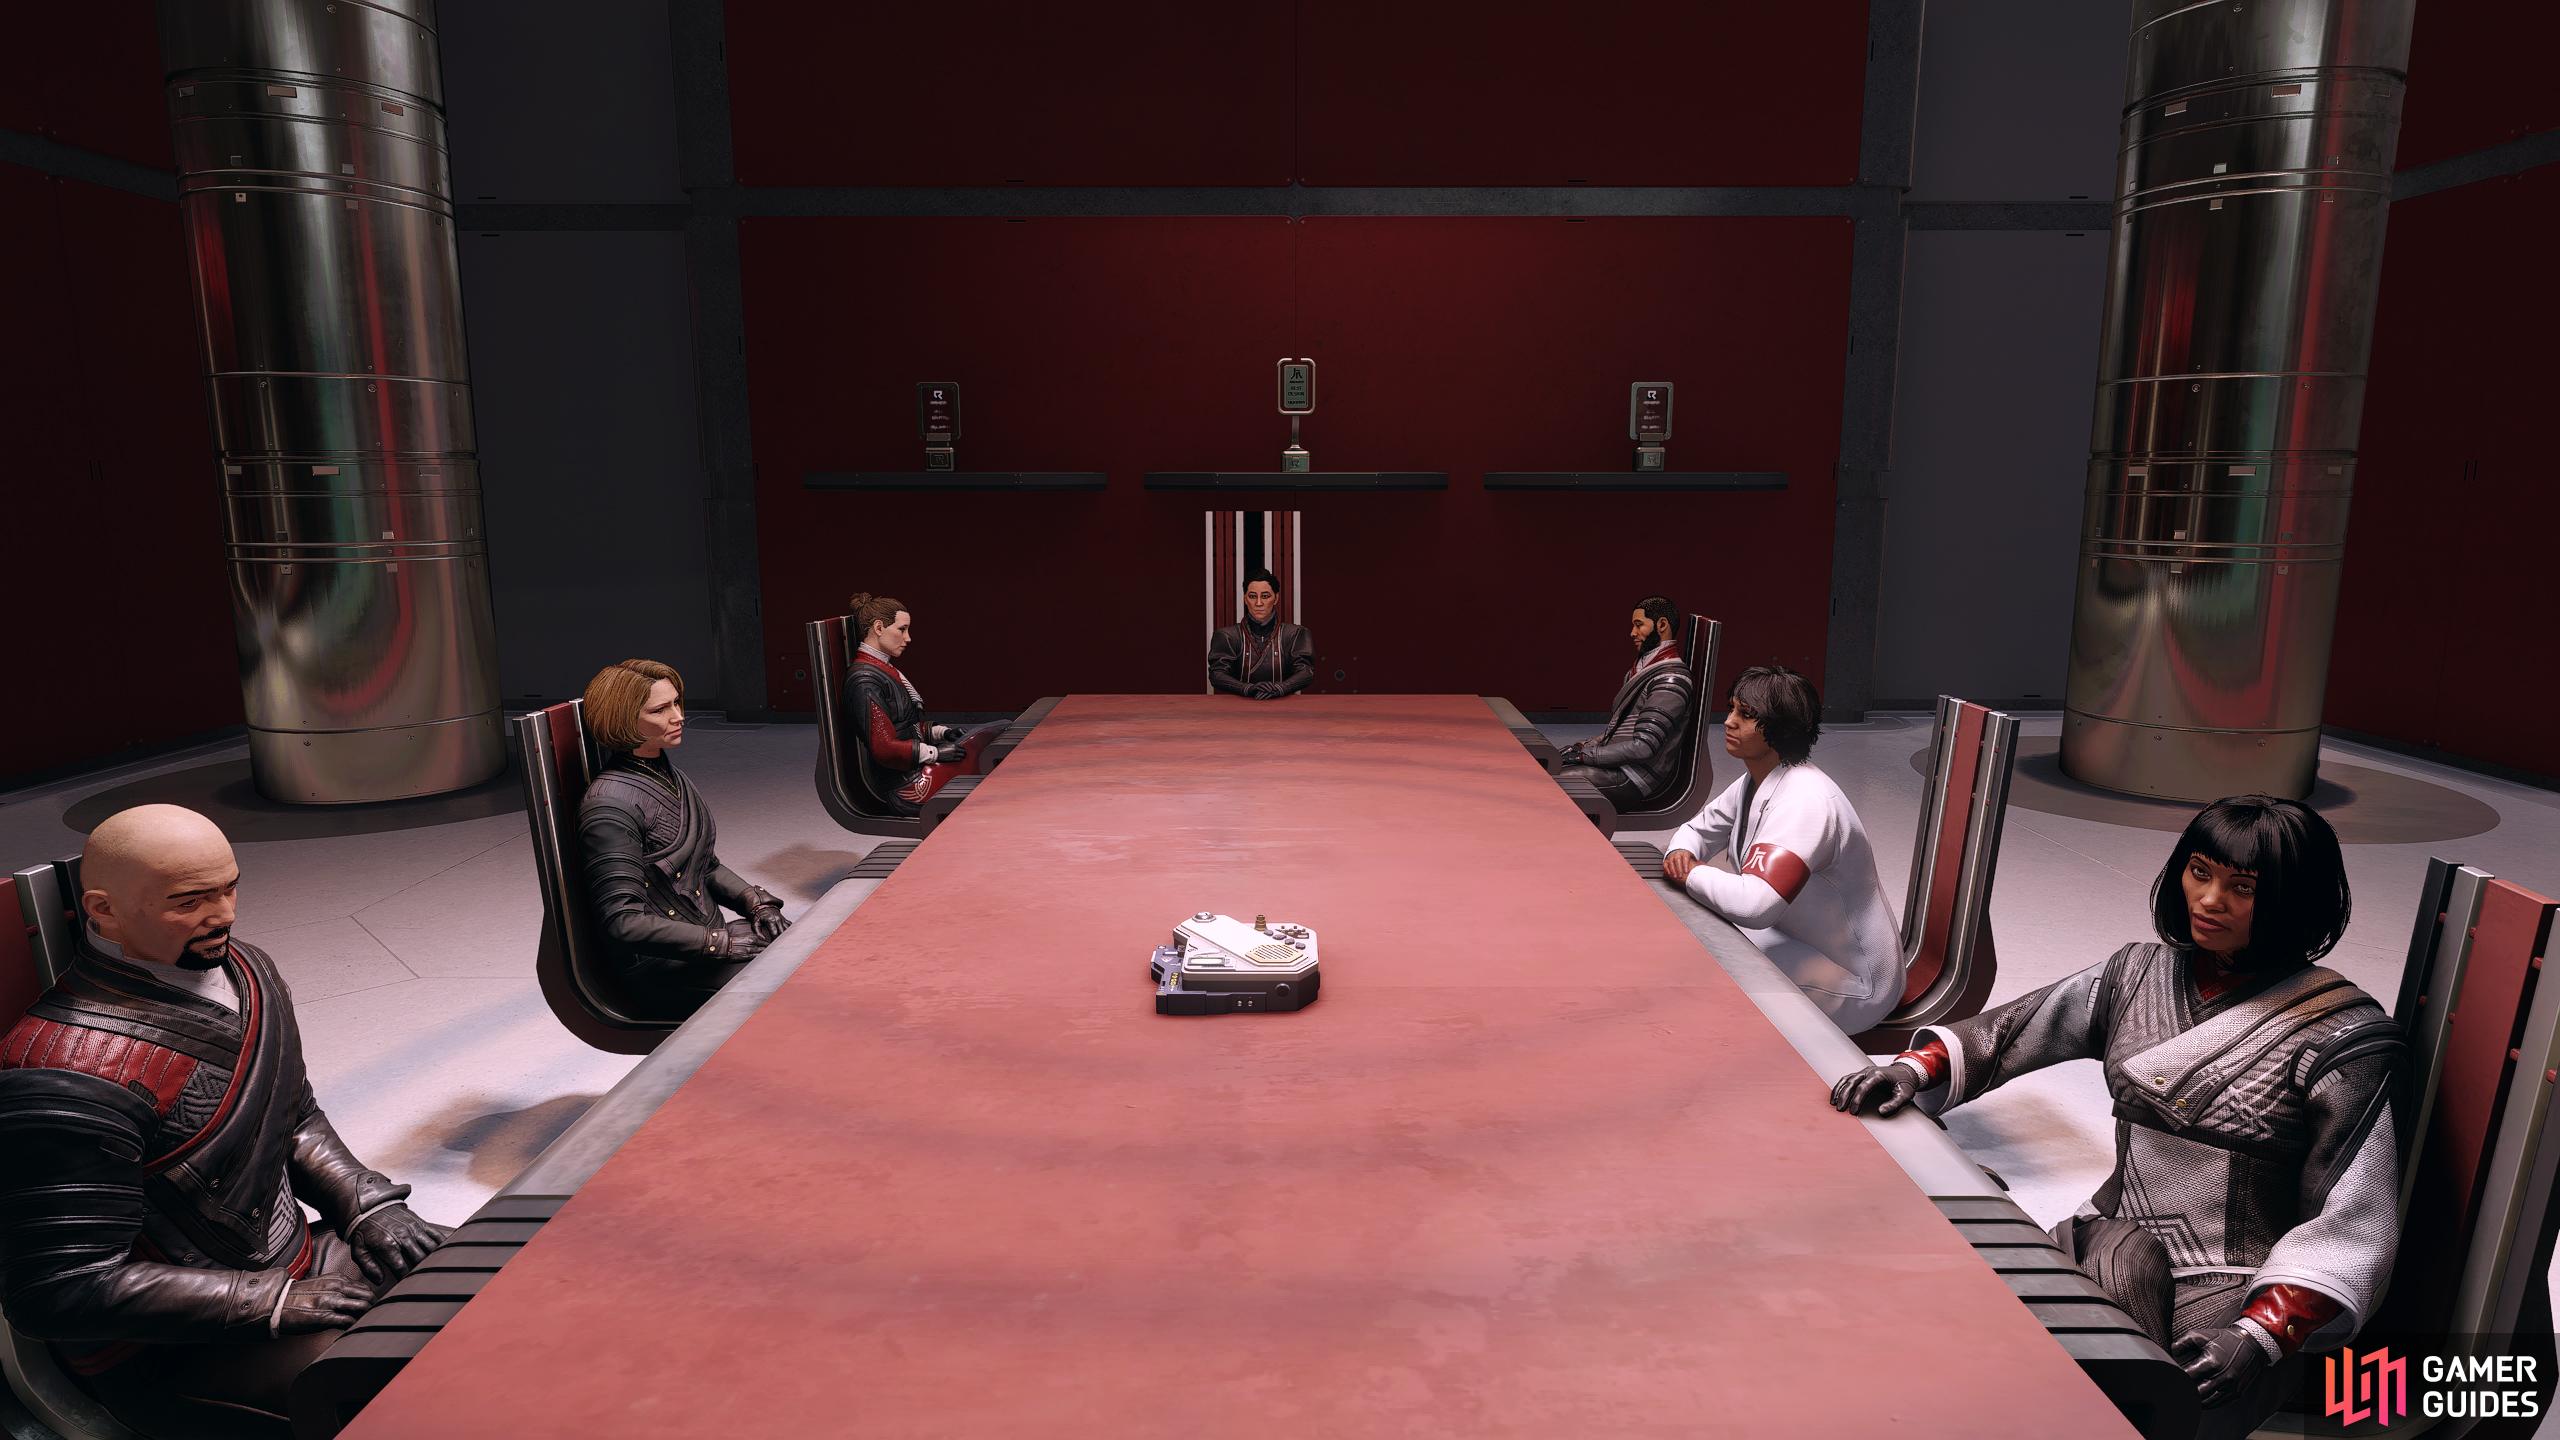 Big decisions are being made in the boardroom today. How are you going to vote? Acquire Infinity and ban the Neuroamp?